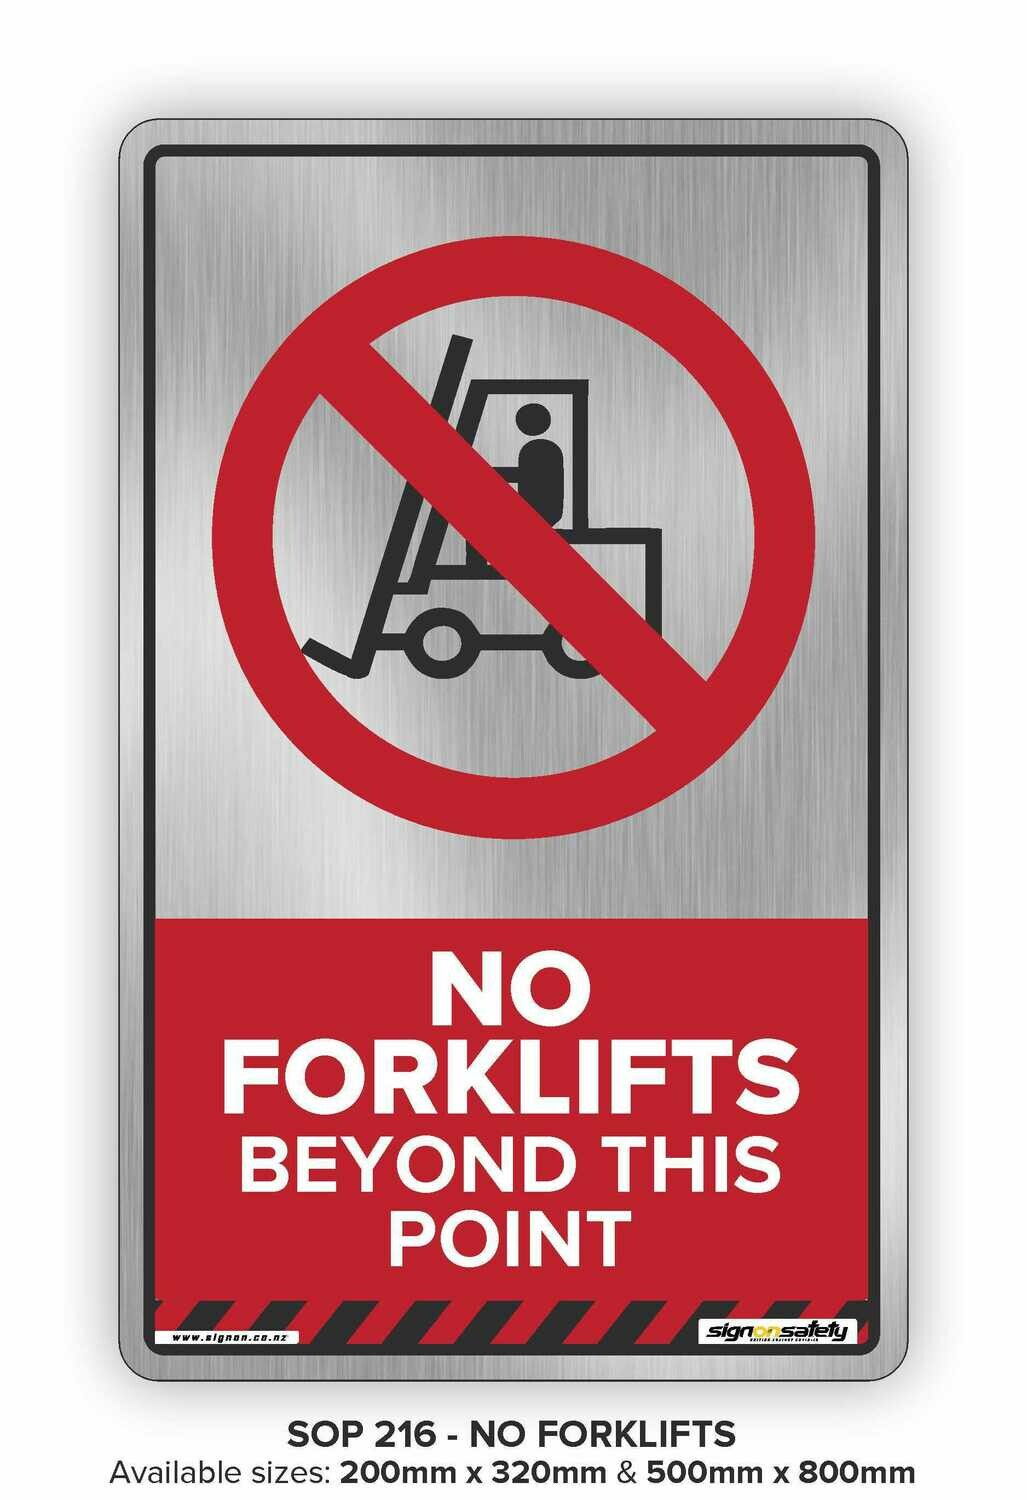 Prohibition - No Forklifts Beyond This Point